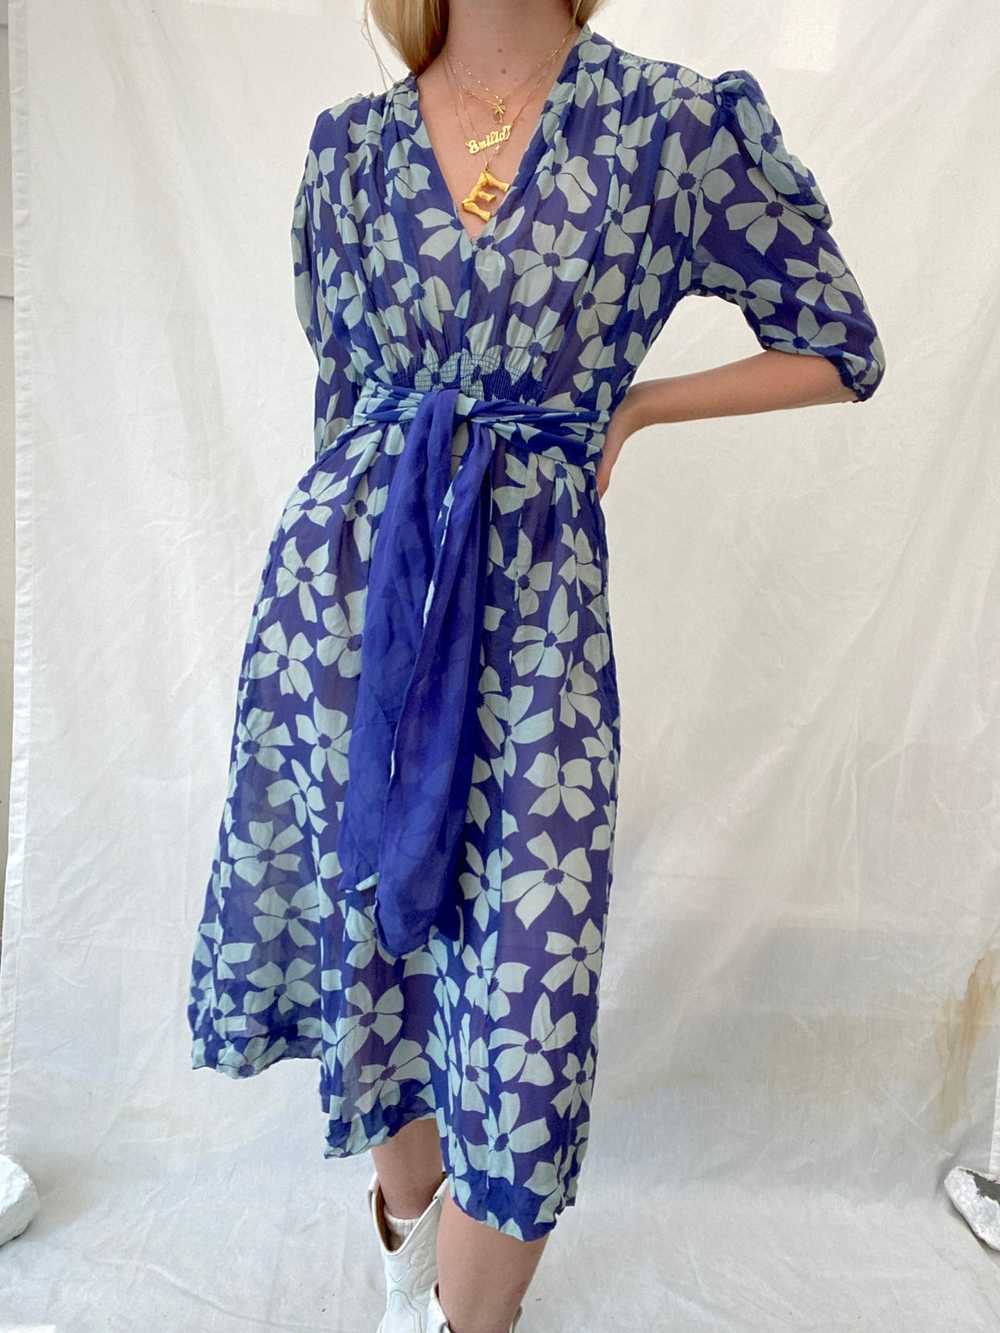 Blue Floral Print Chiffon Dress with Puffed Sleev… - image 1